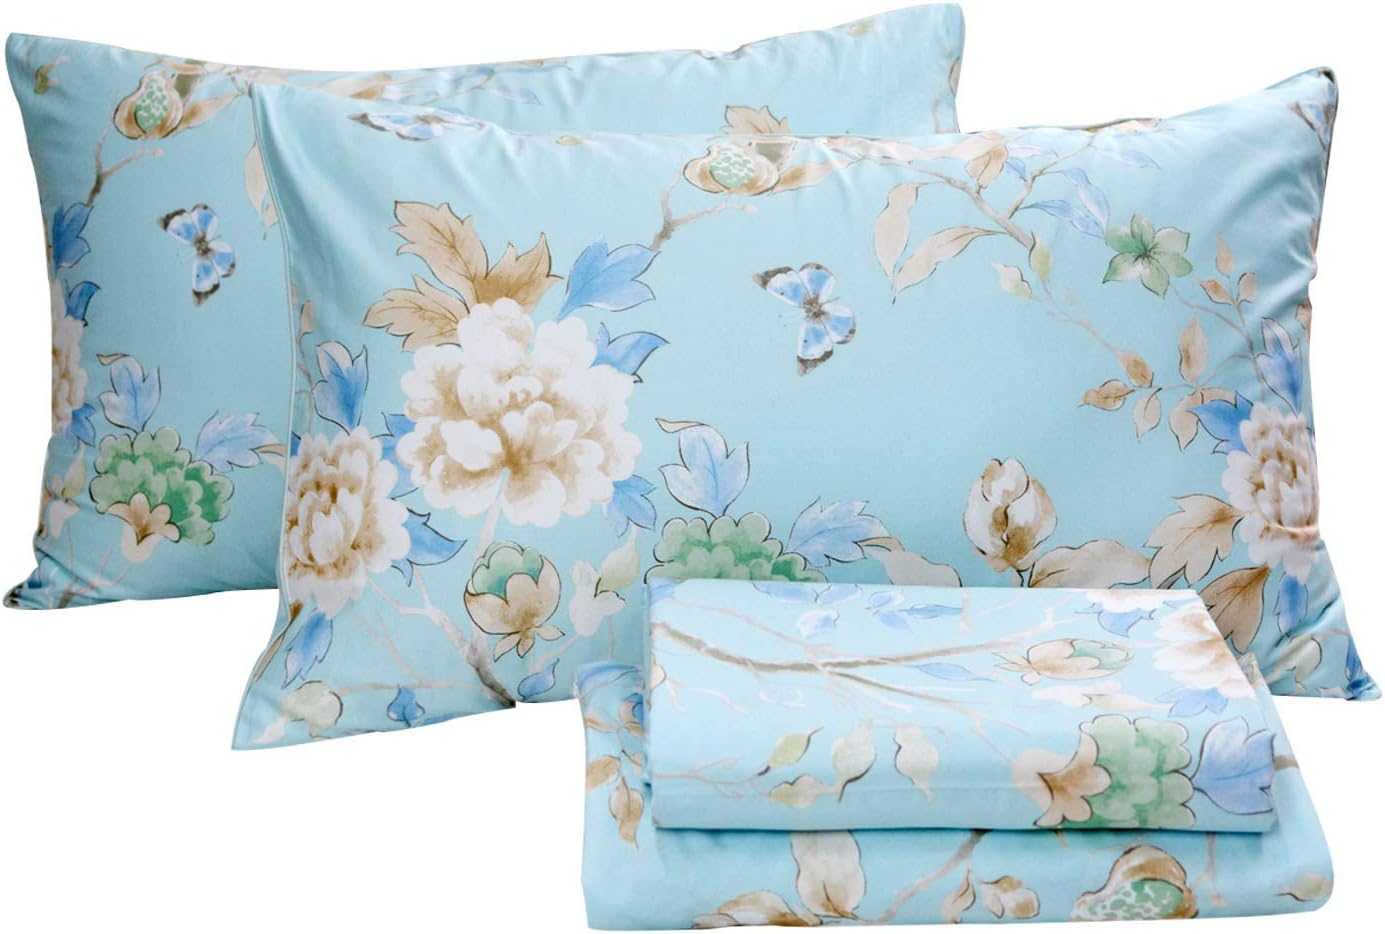 FADFAY Floral Bedding Shabby Blue Bird Print Bed Sheet Set Luxury Bedding Collections 800 Thread Count 100% Egyptian Cotton Deep Pocket, 4 Piece-Queen Size